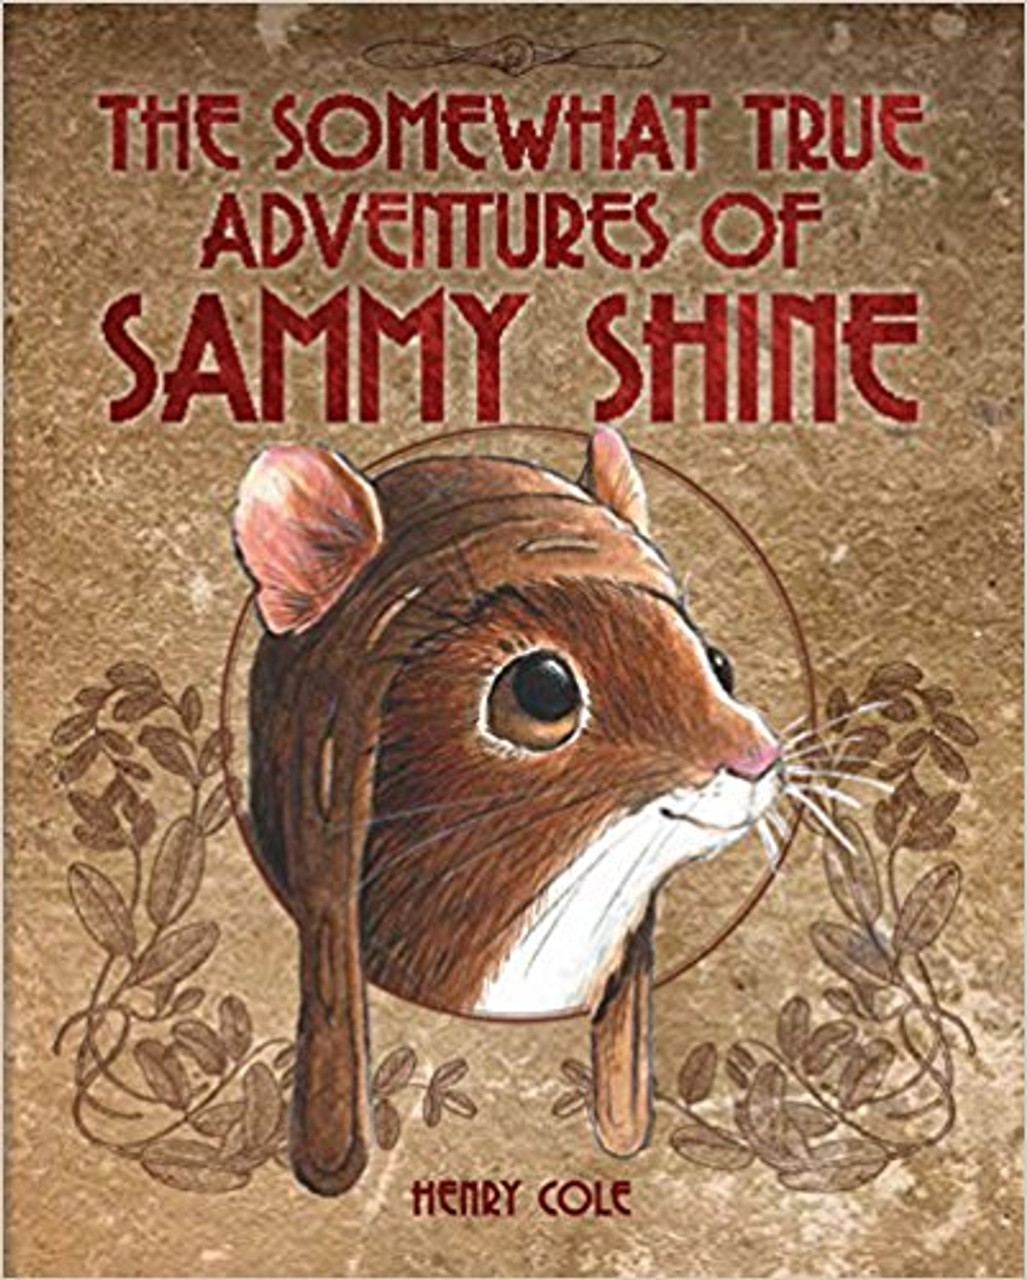 The Somewhat True Adventures of Sammy Shine by Henry Cole